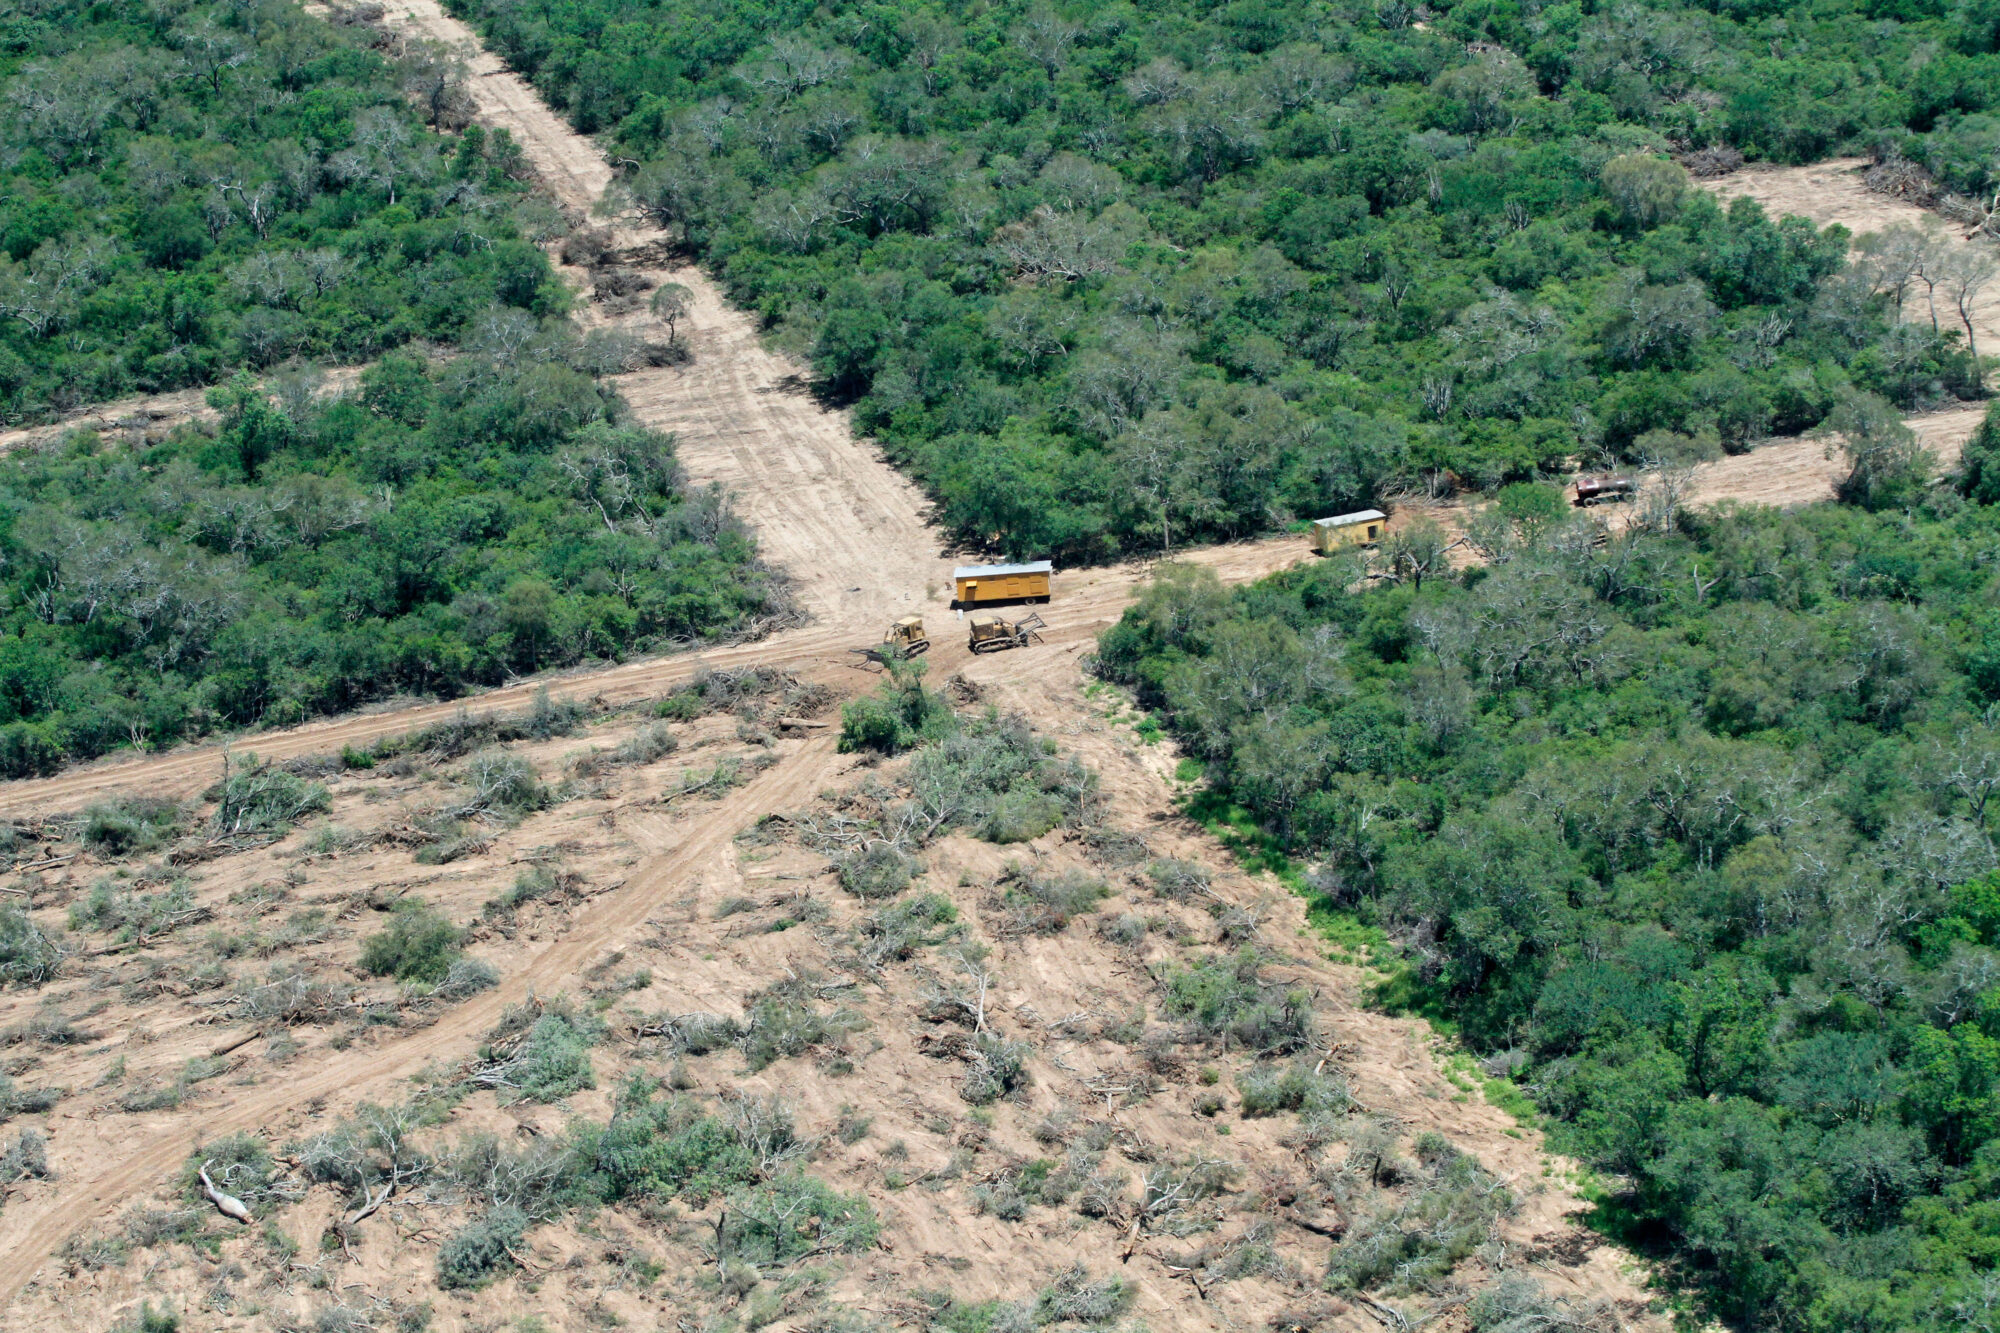 <p>Deforestation in the Gran Chaco near Mariscal Estigarribia, Paraguay. Around a quarter of the Gran Chaco’s area has been deforested since 1985, with soy and beef production key drivers of forest loss. (Image: Michael Edwards / Alamy)</p>